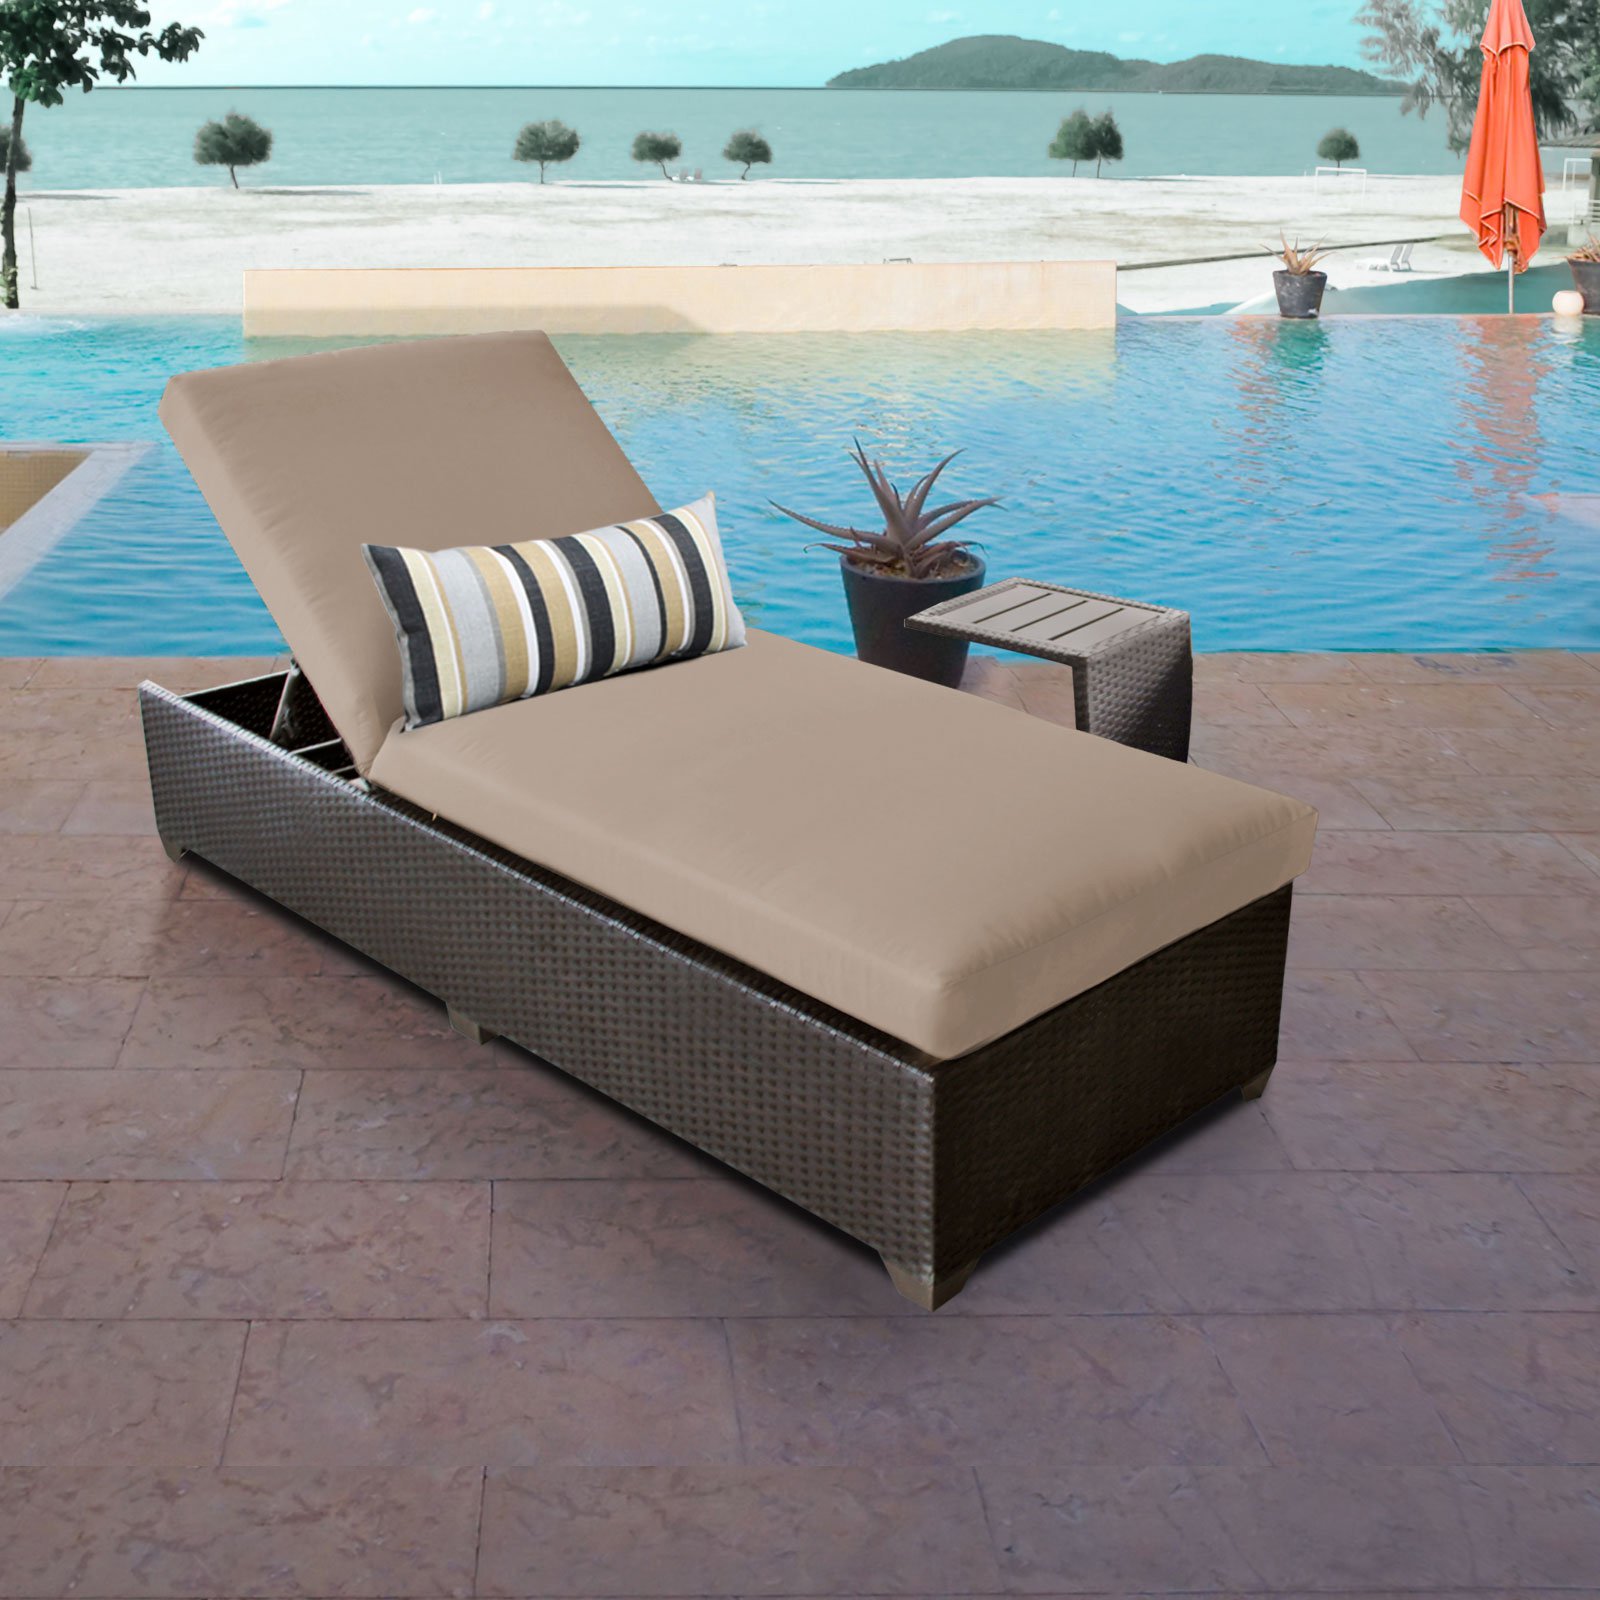 TK Classics Barbados Wicker Patio Chaise Lounge with Optional Side Table - image 5 of 10